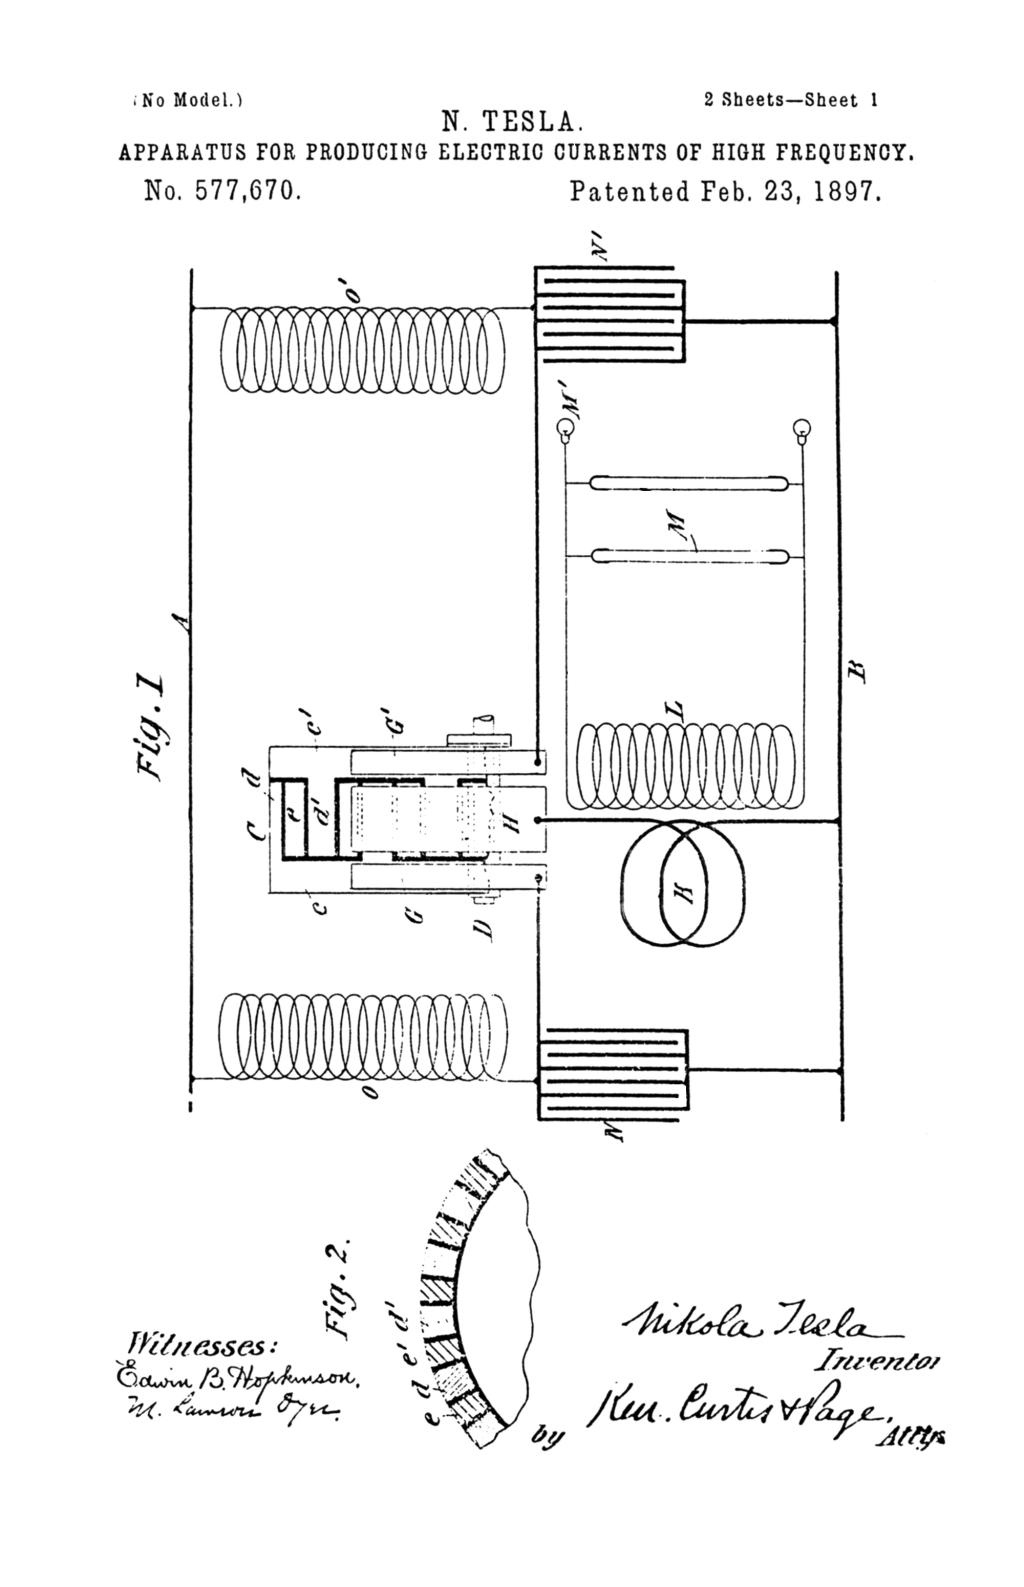 Nikola Tesla U.S. Patent 577,670 - Apparatus for Producing Electric Currents of High Frequency - Image 1